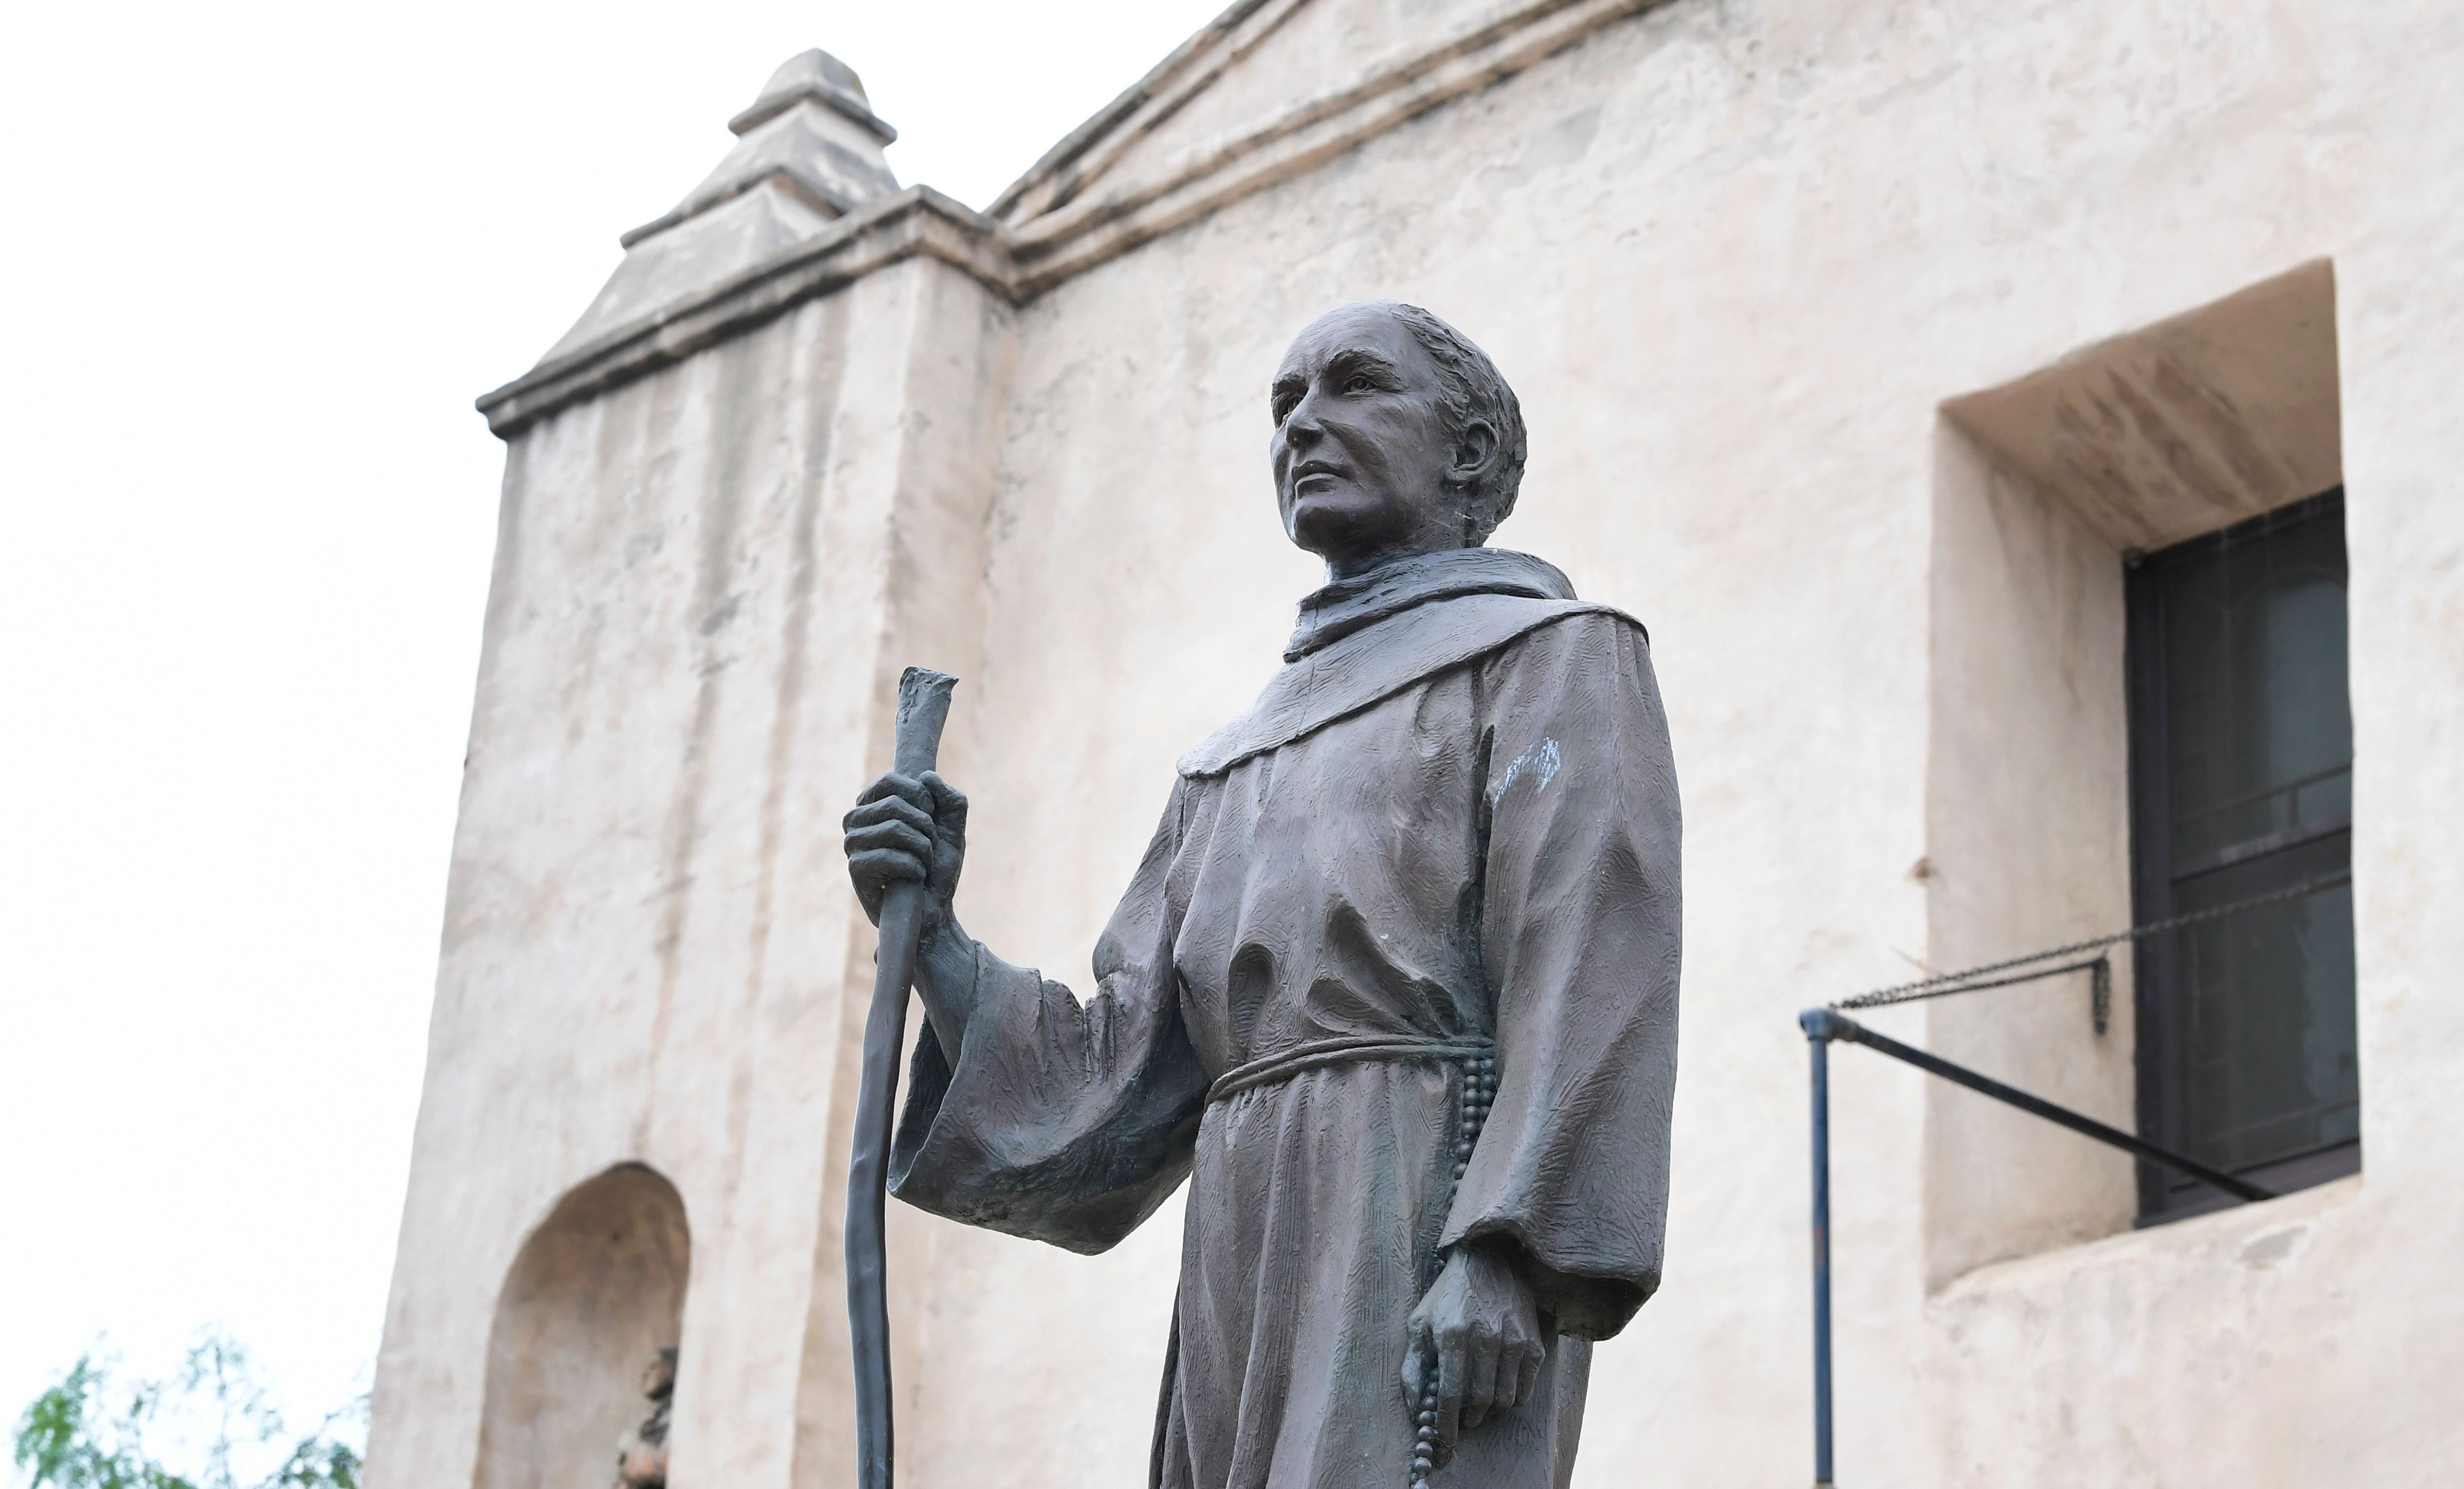 A statue of Father Junipero Serra is seen in front of the San Gabriel Mission in San Gabriel, California on June 21, 2020. (Photo by FREDERIC J. BROWN/AFP via Getty Images)